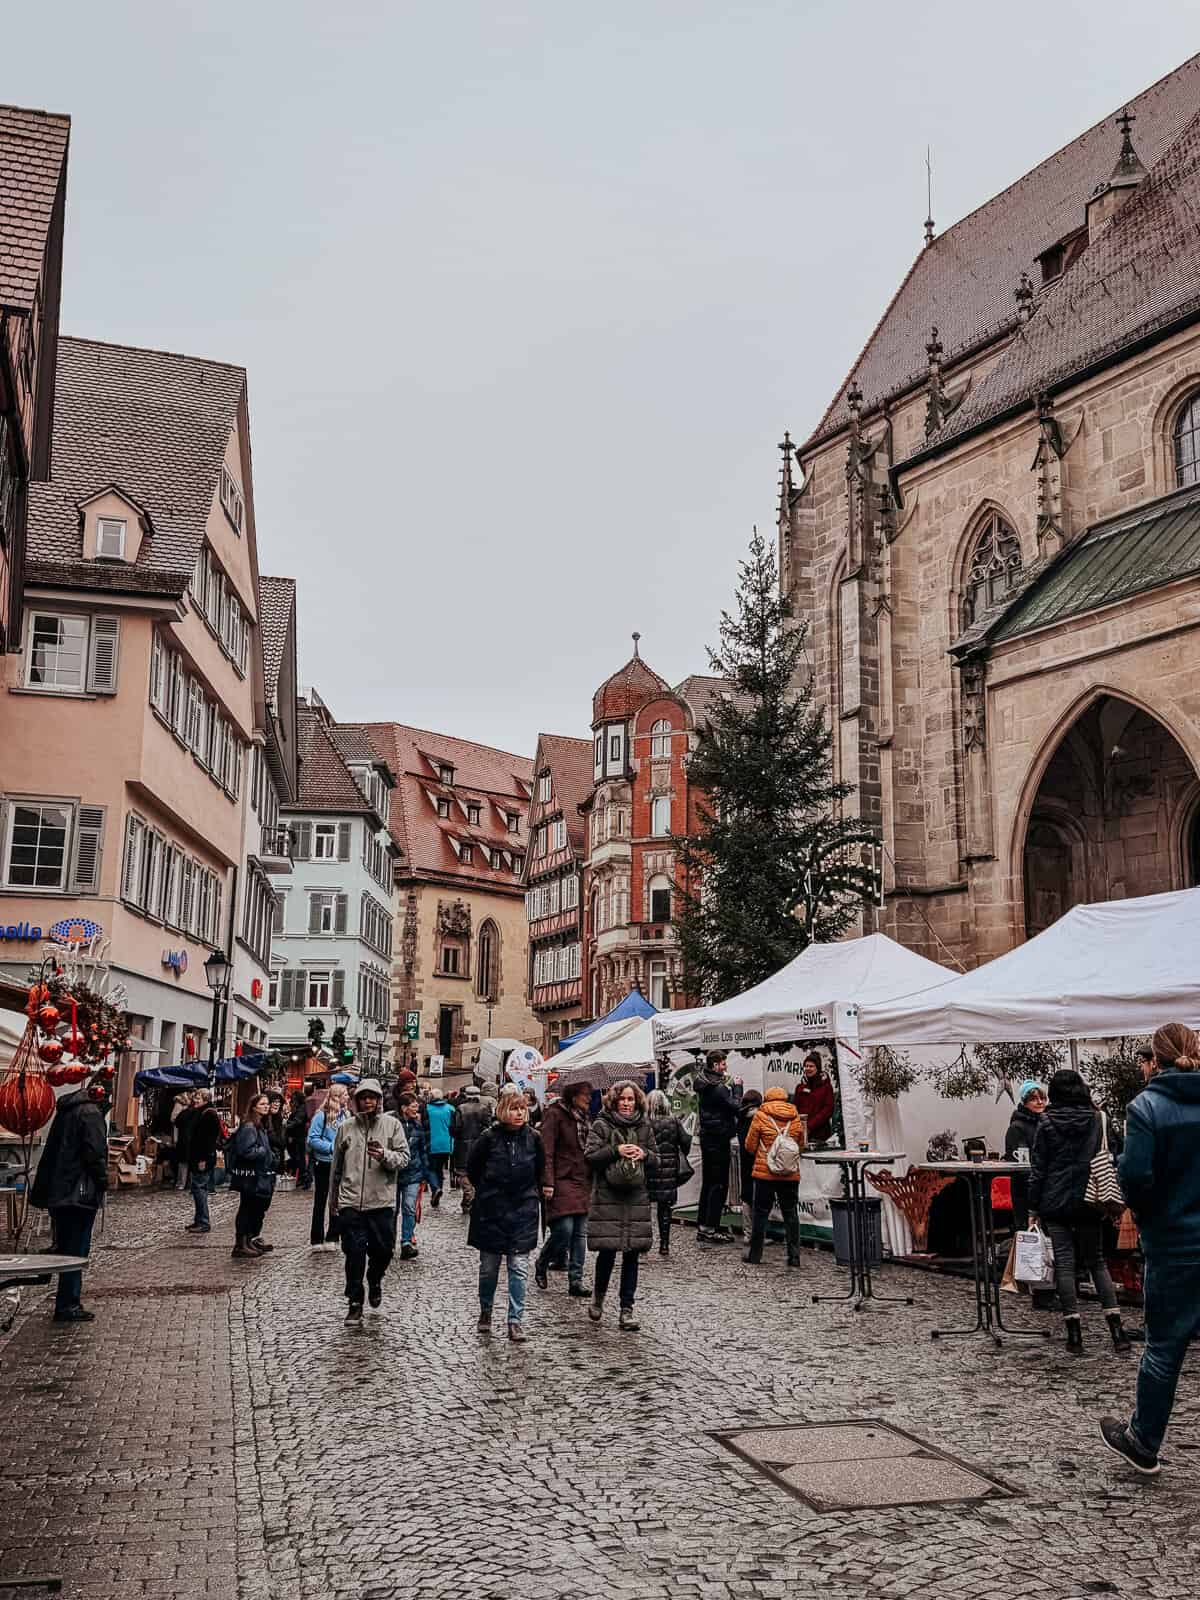 View of a busy street market adjacent to a large Gothic church in Tübingen, with people browsing stalls under overcast skies.